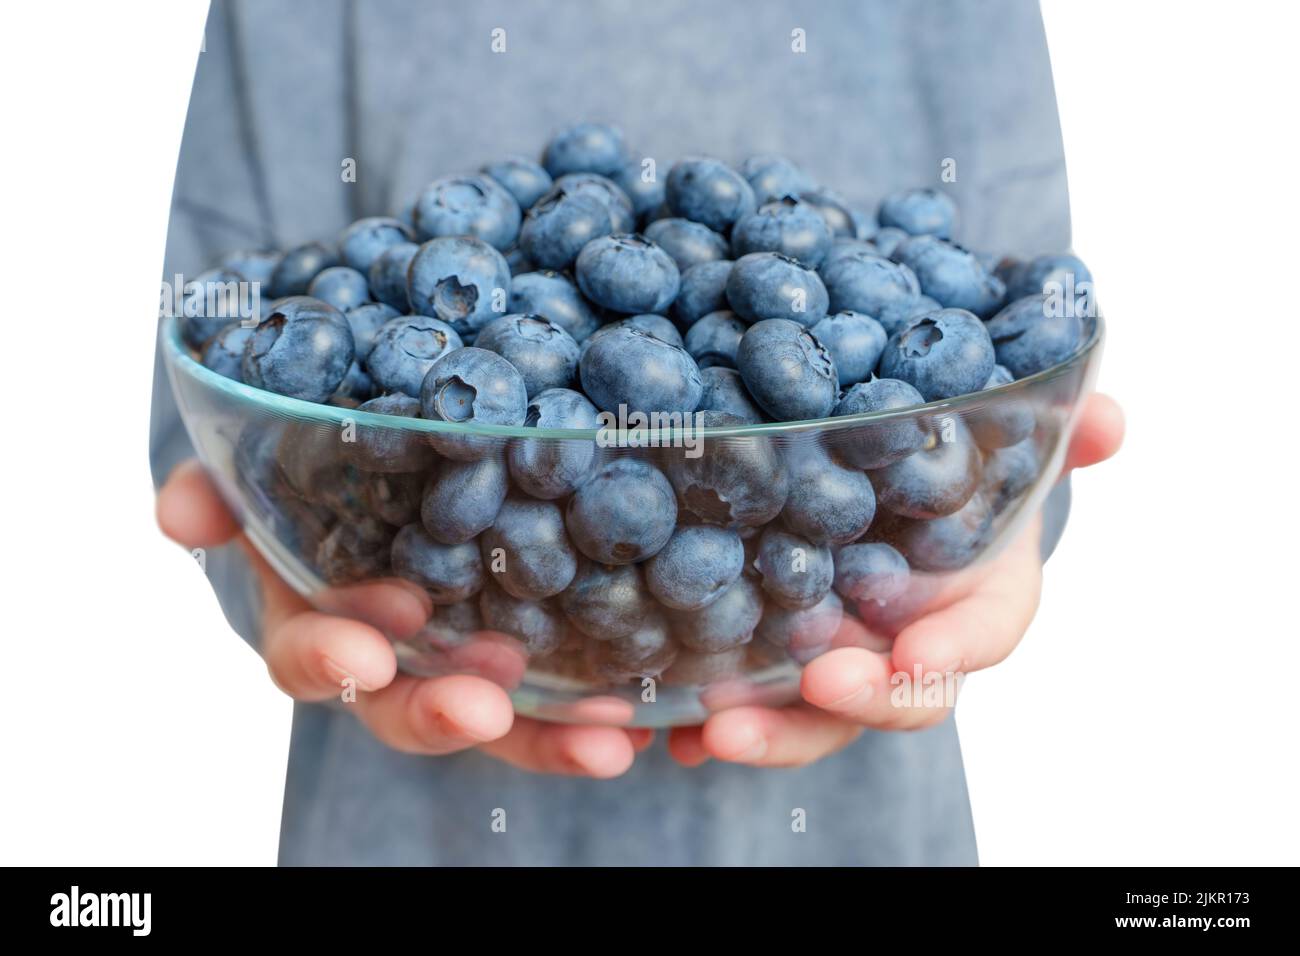 Woman wearing a matching dress holds a large glass bowl of fresh ripe blueberries isolated on white background, wide angle, selective focus. Stock Photo